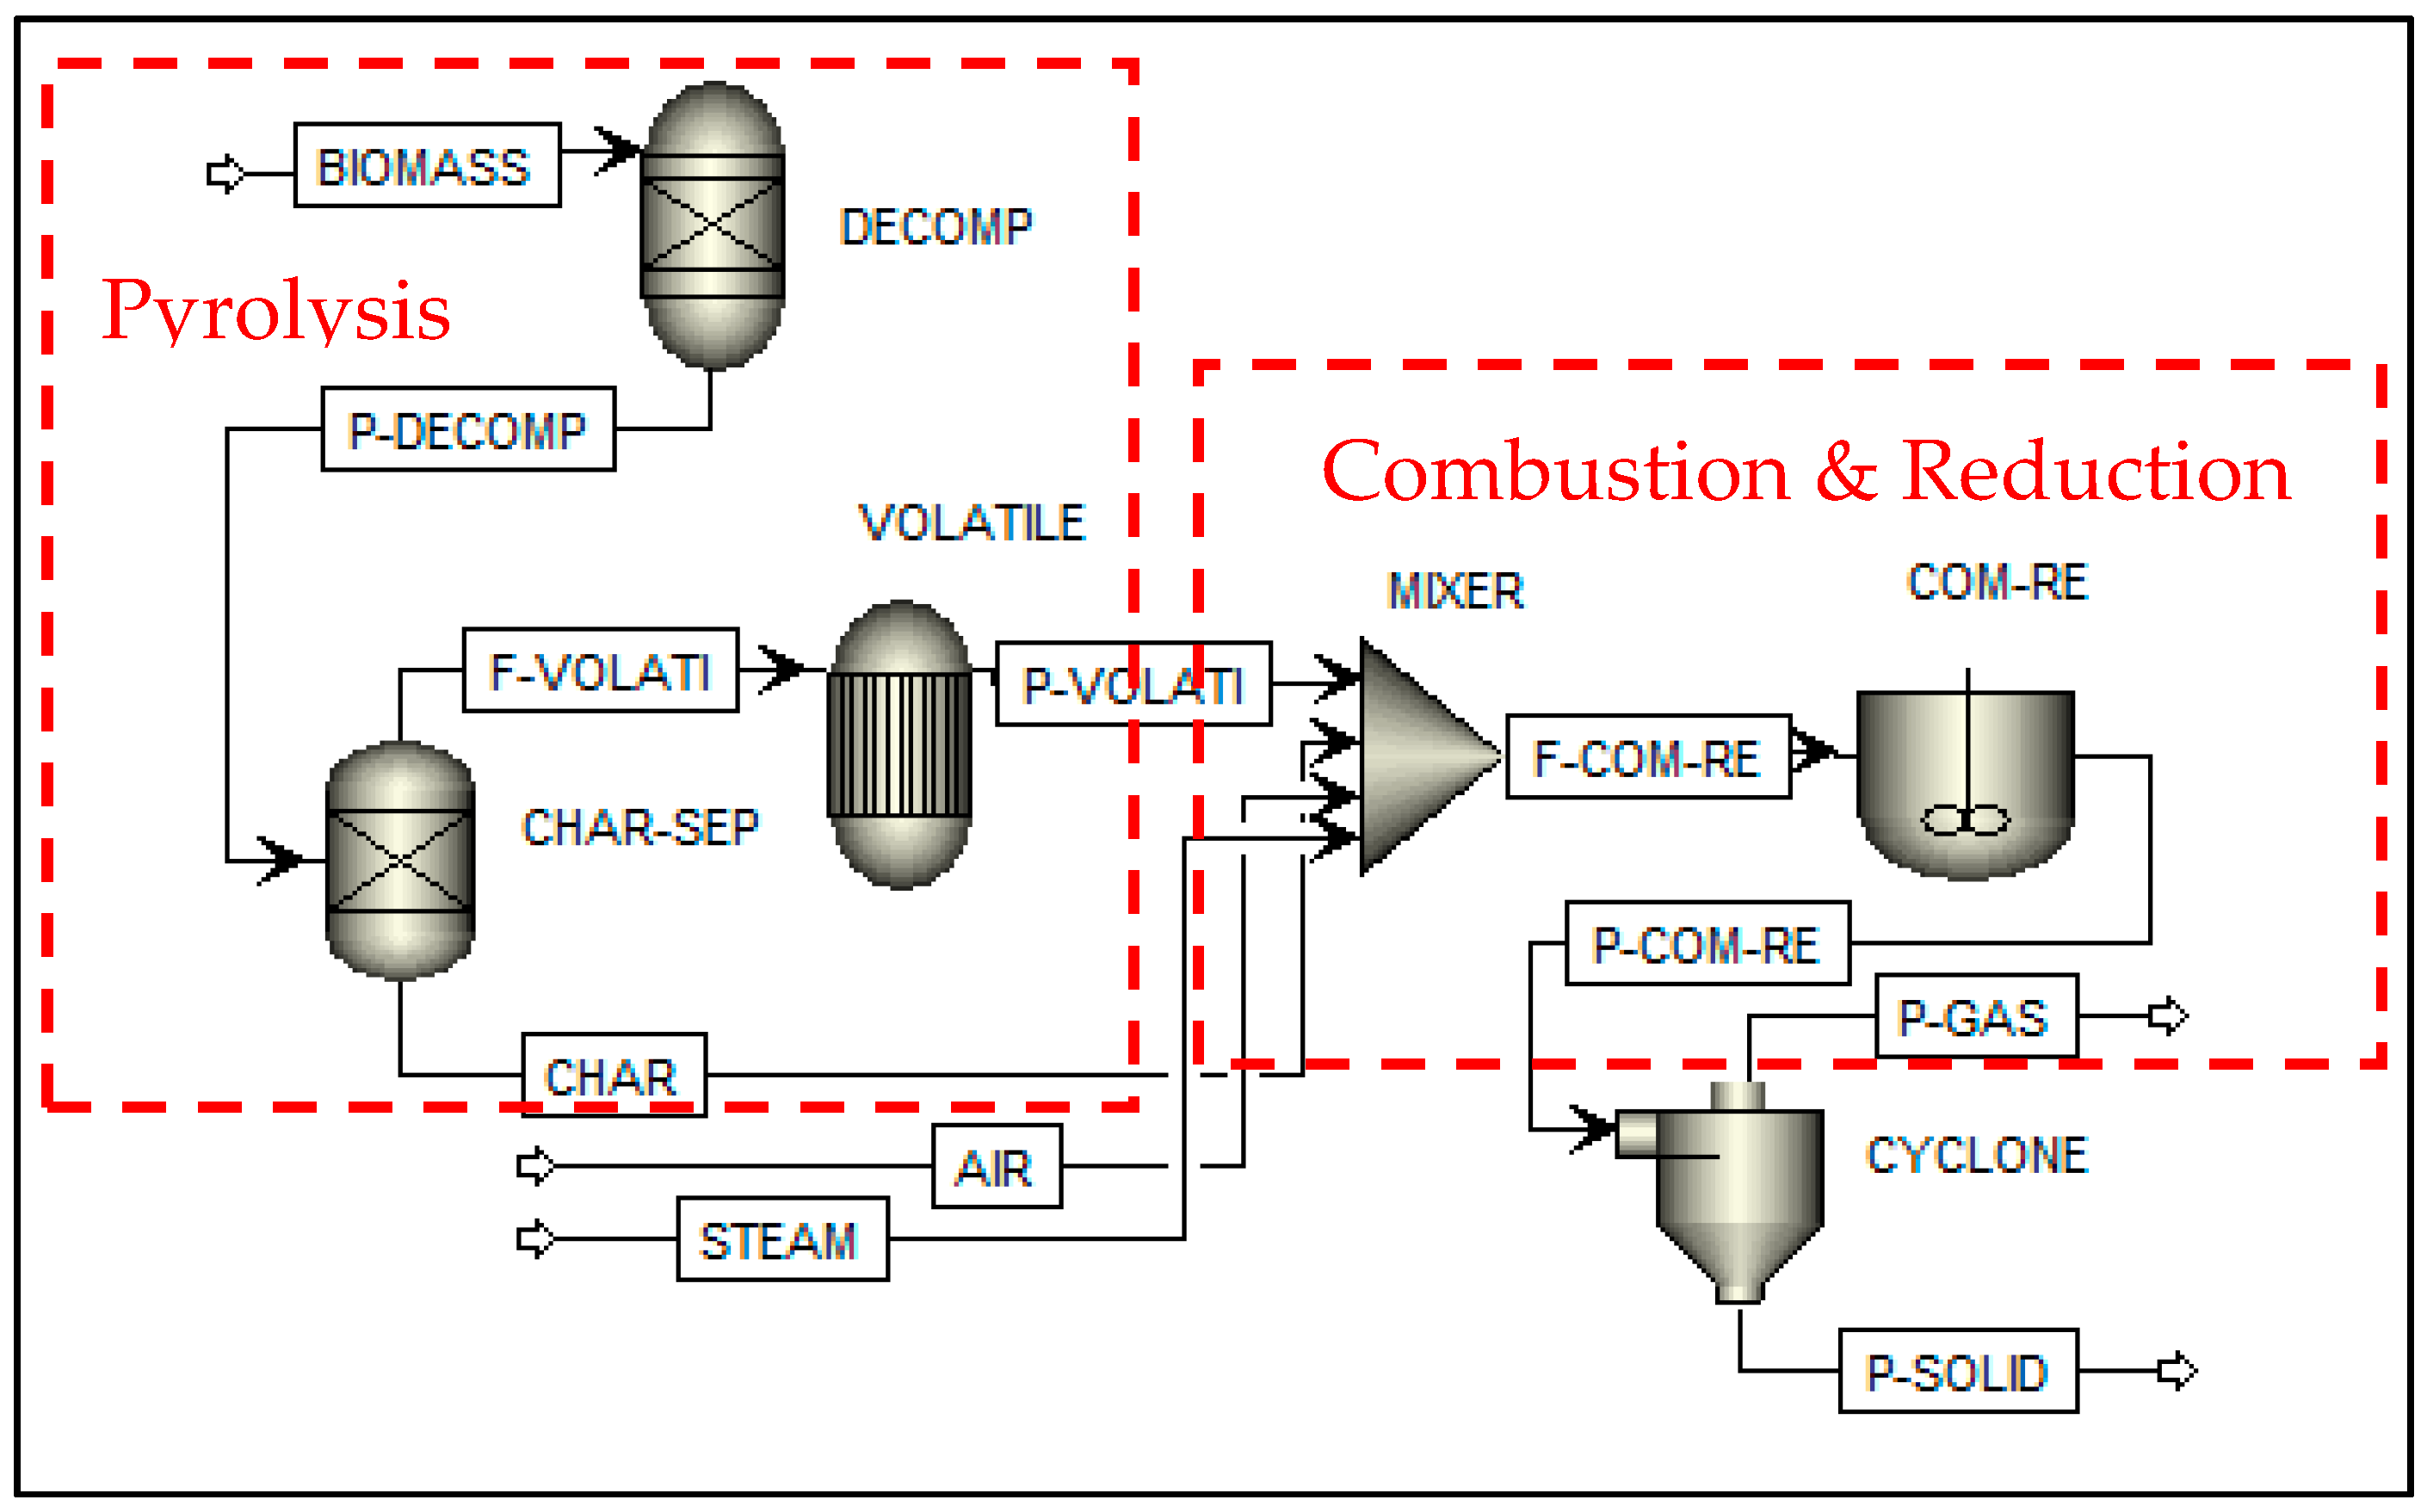 Energies Free Full Text Simulation Of Steam Gasification In A Fluidized Bed Reactor With Energy Self Sufficient Condition Html